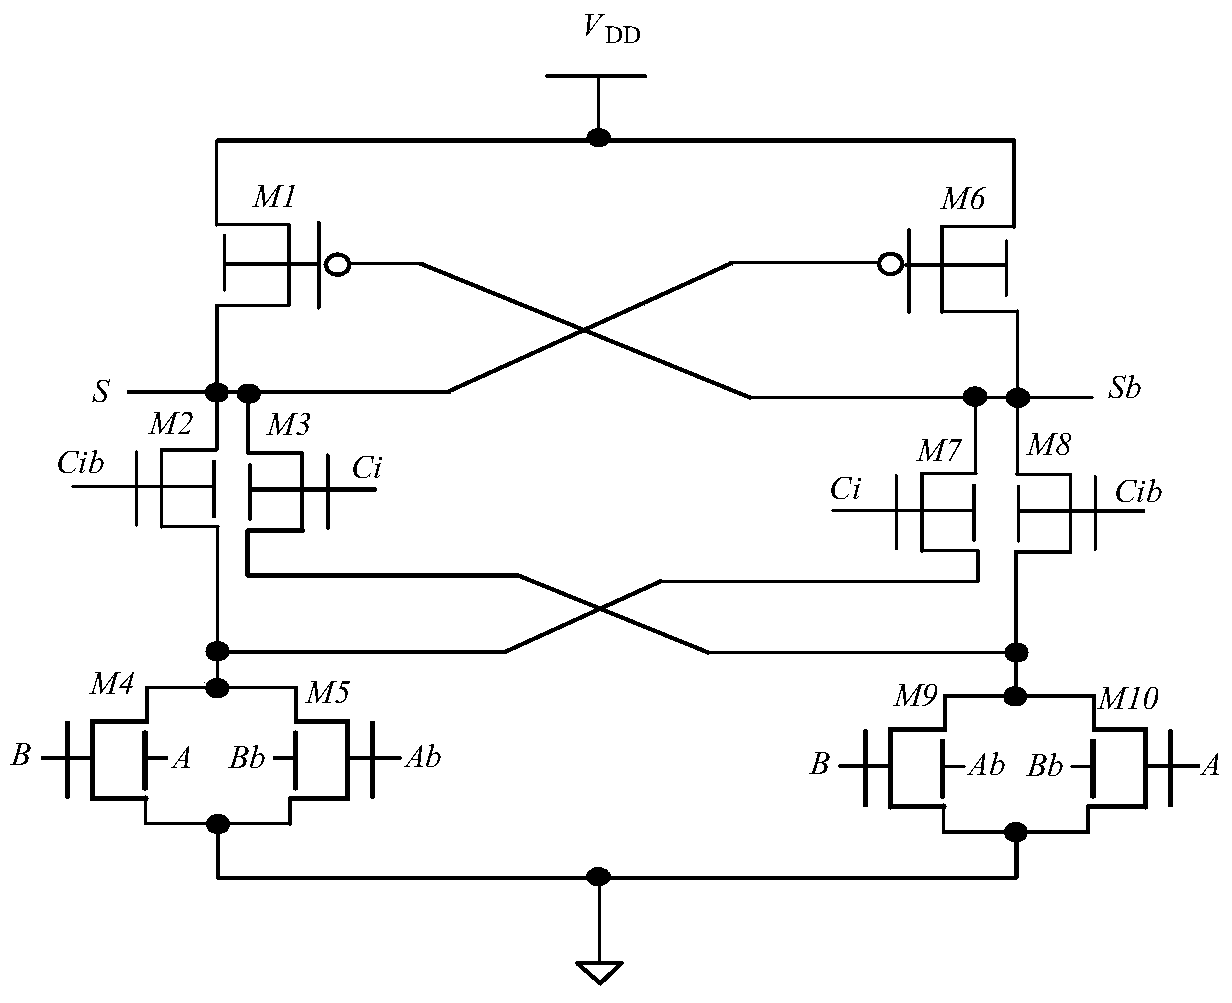 A One-bit Full Adder Based on Finfet Device